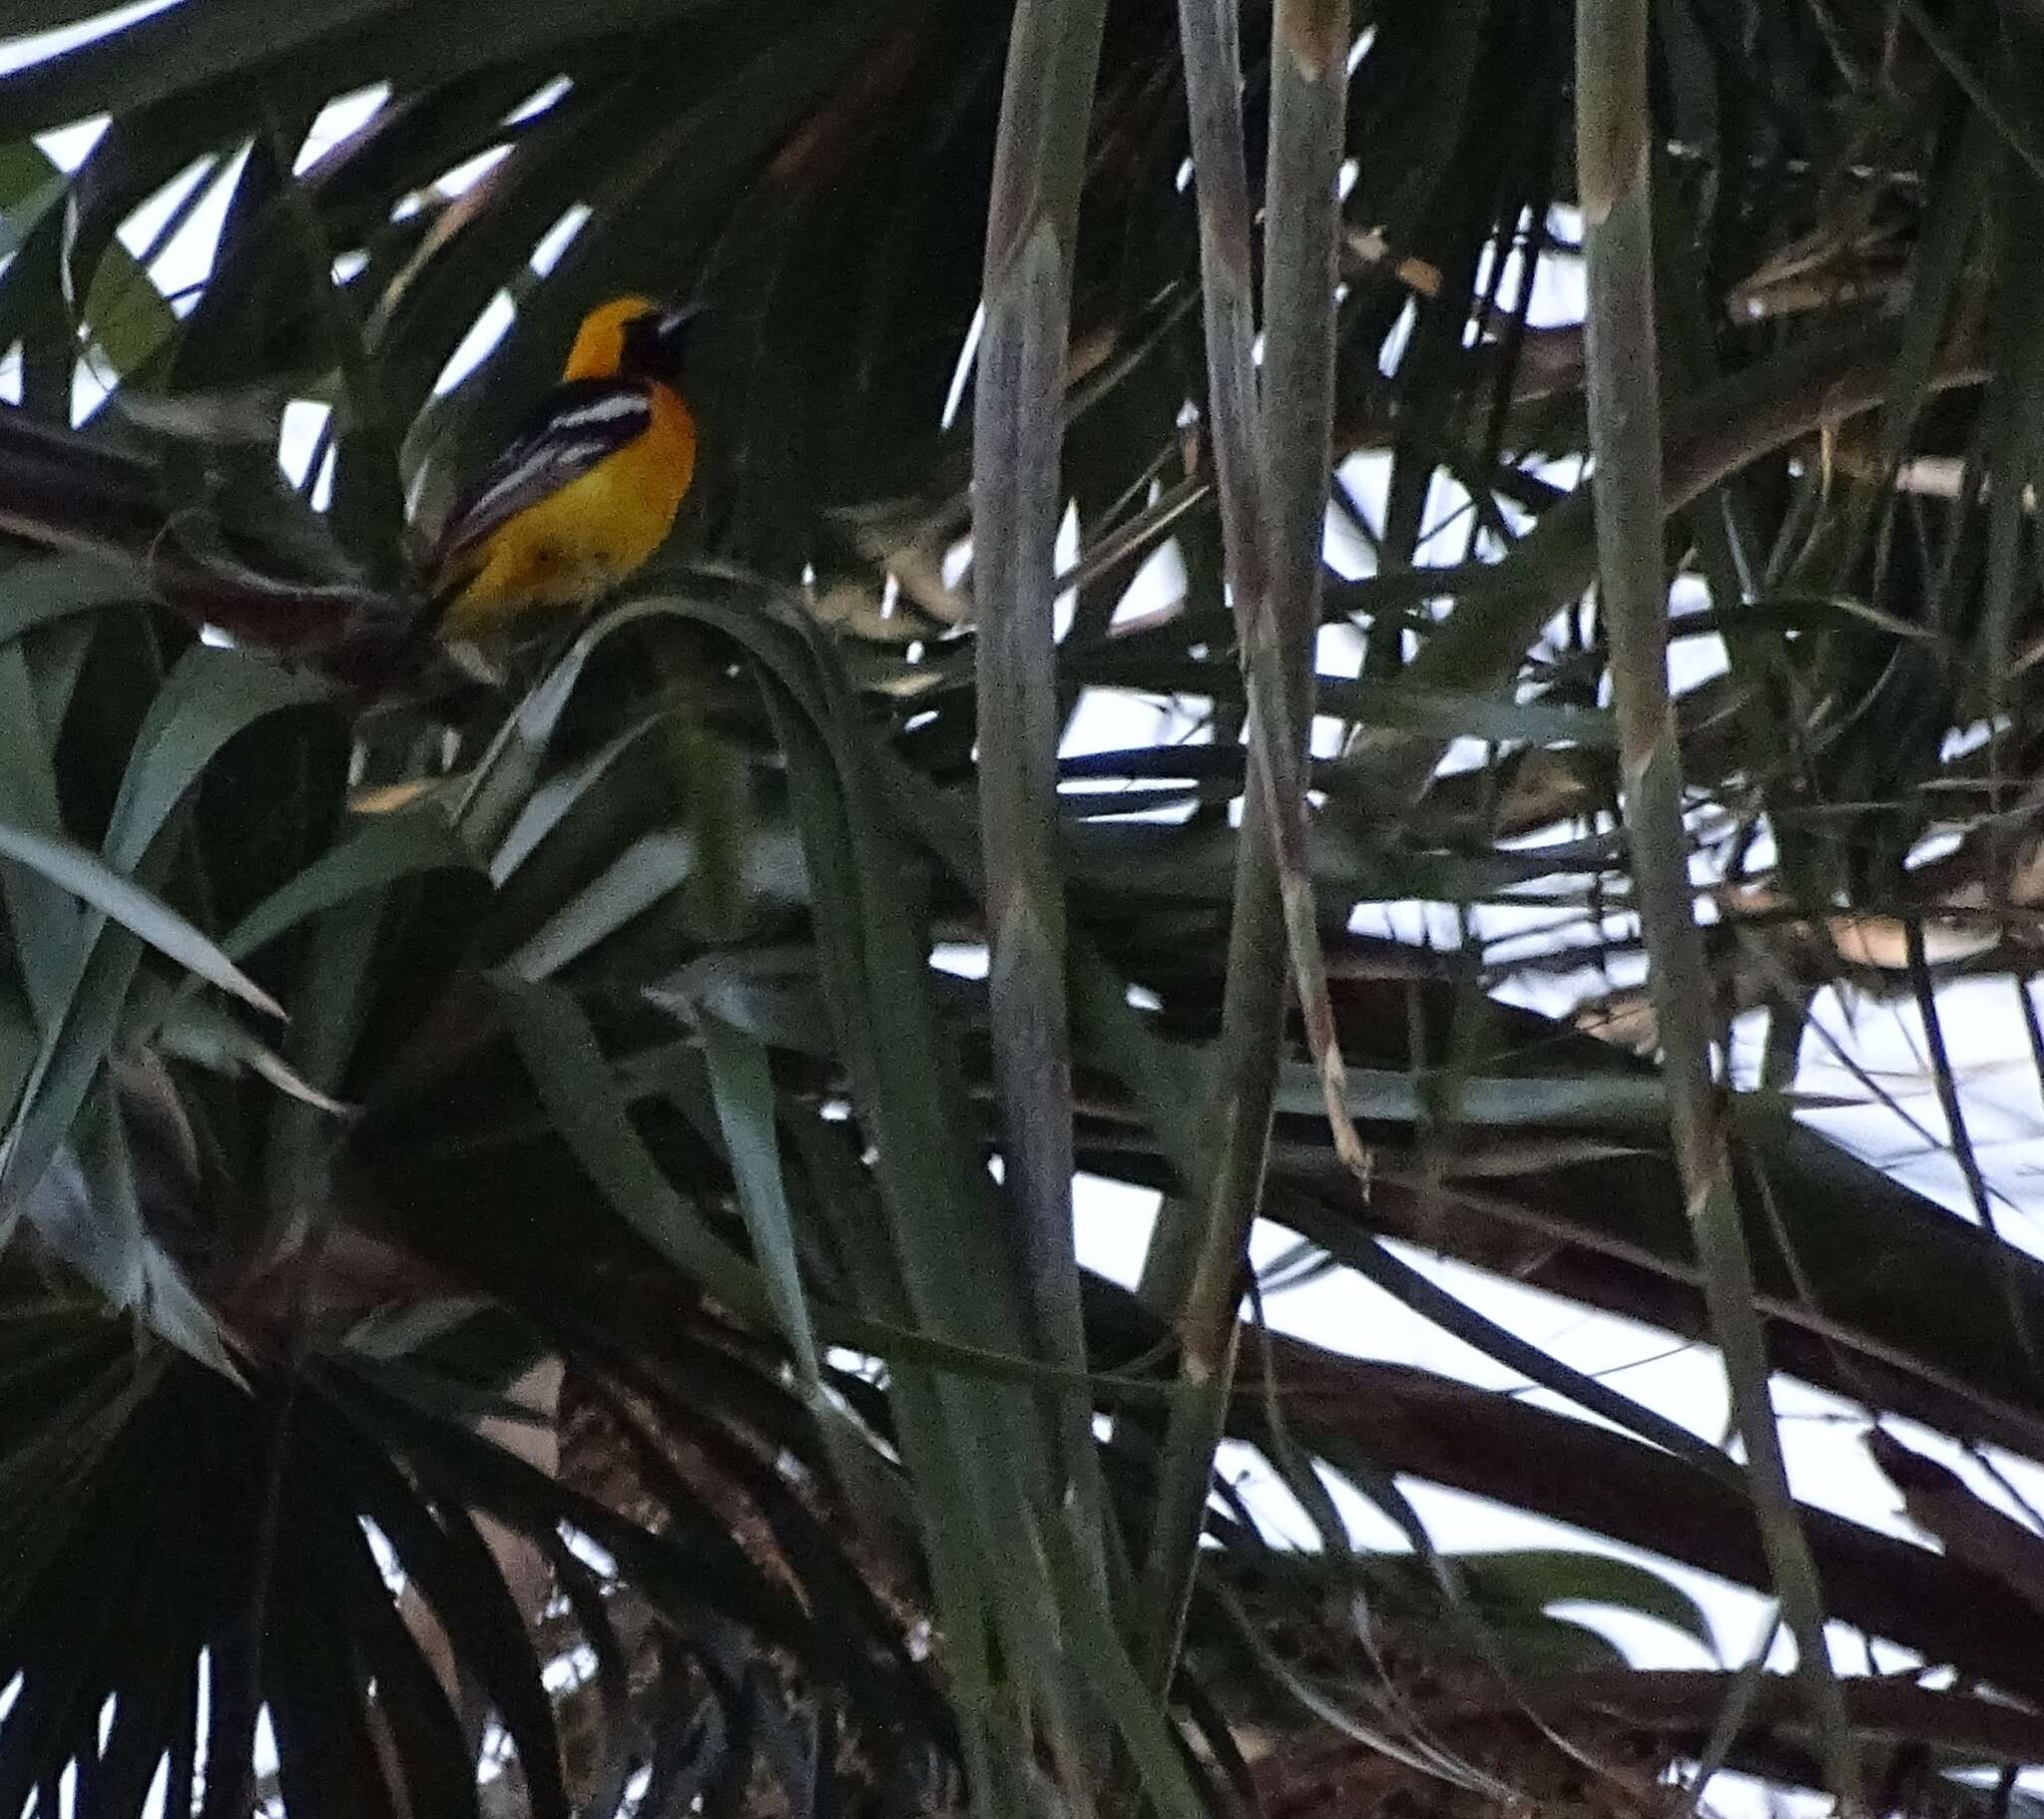 Image of Hooded Oriole